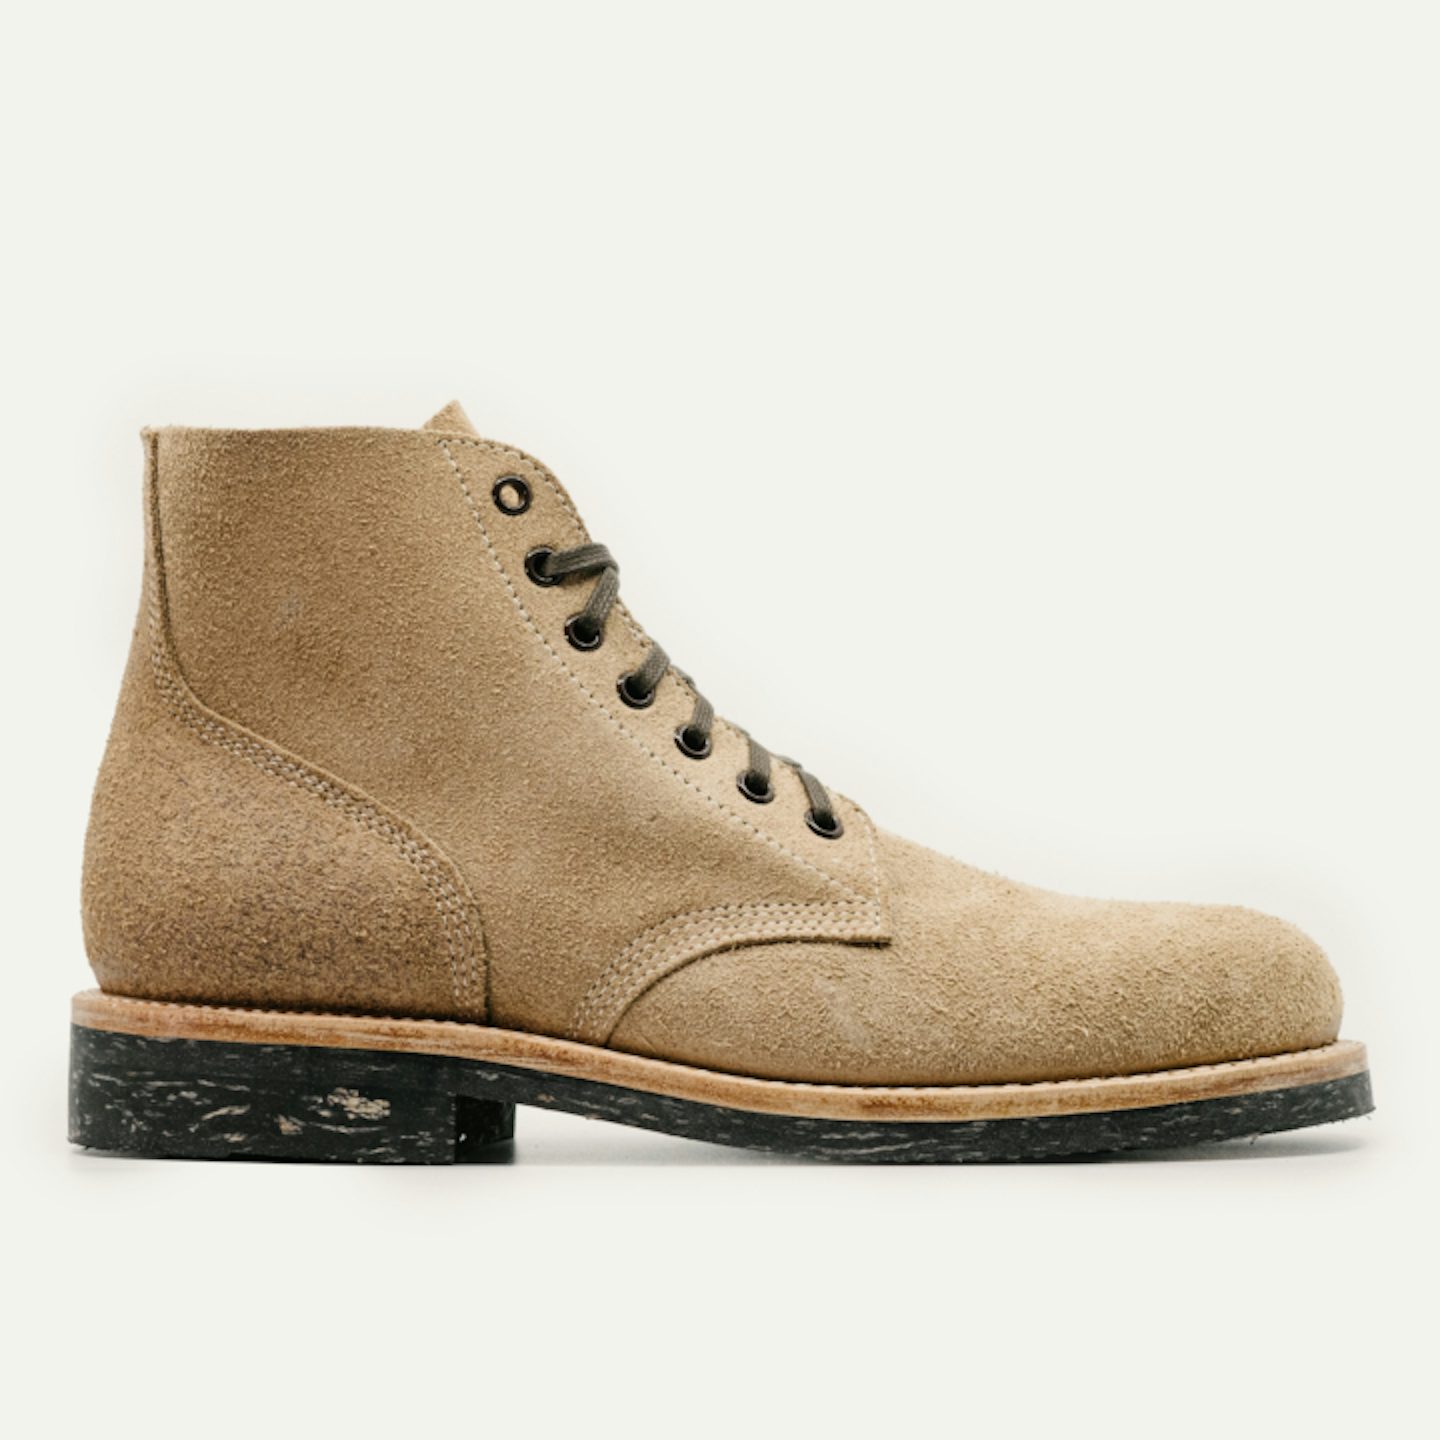 N-2 Field Boot - Natural Chromexcel Roughout